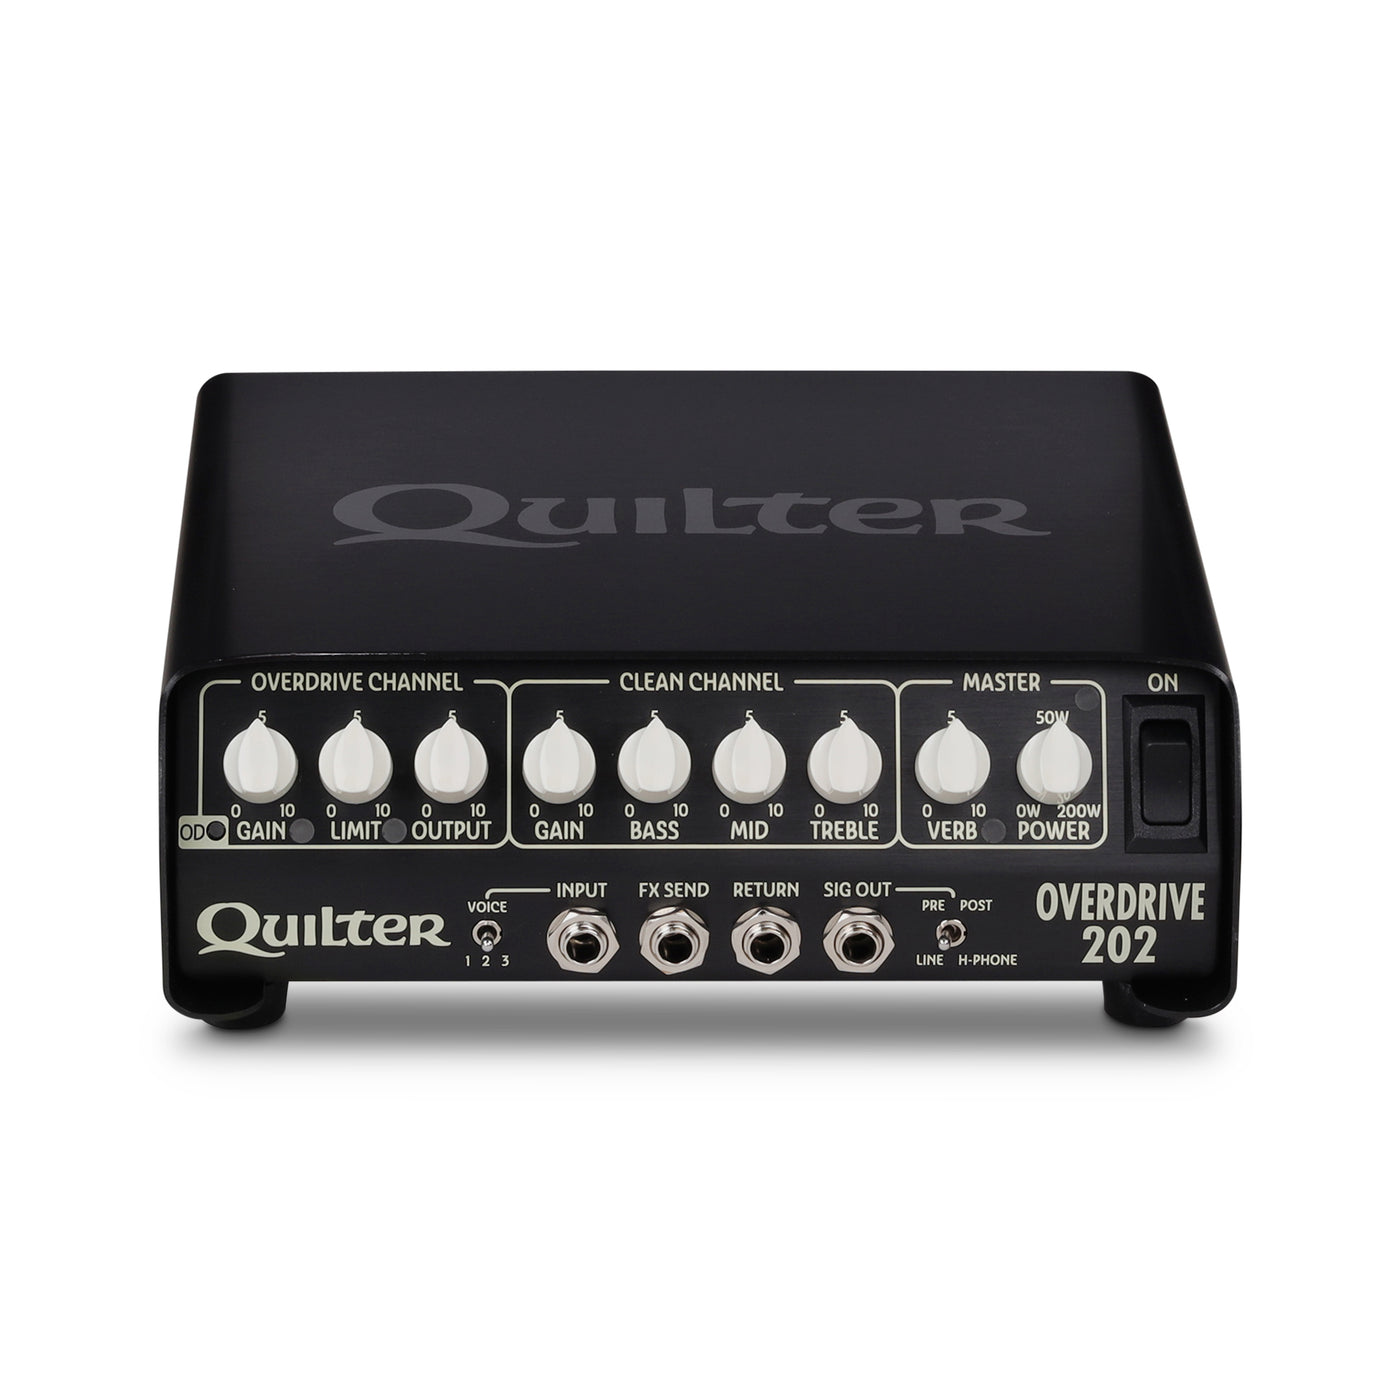 Quilter Labs Overdrive 202 Guitar Amplifier Head tilted forward